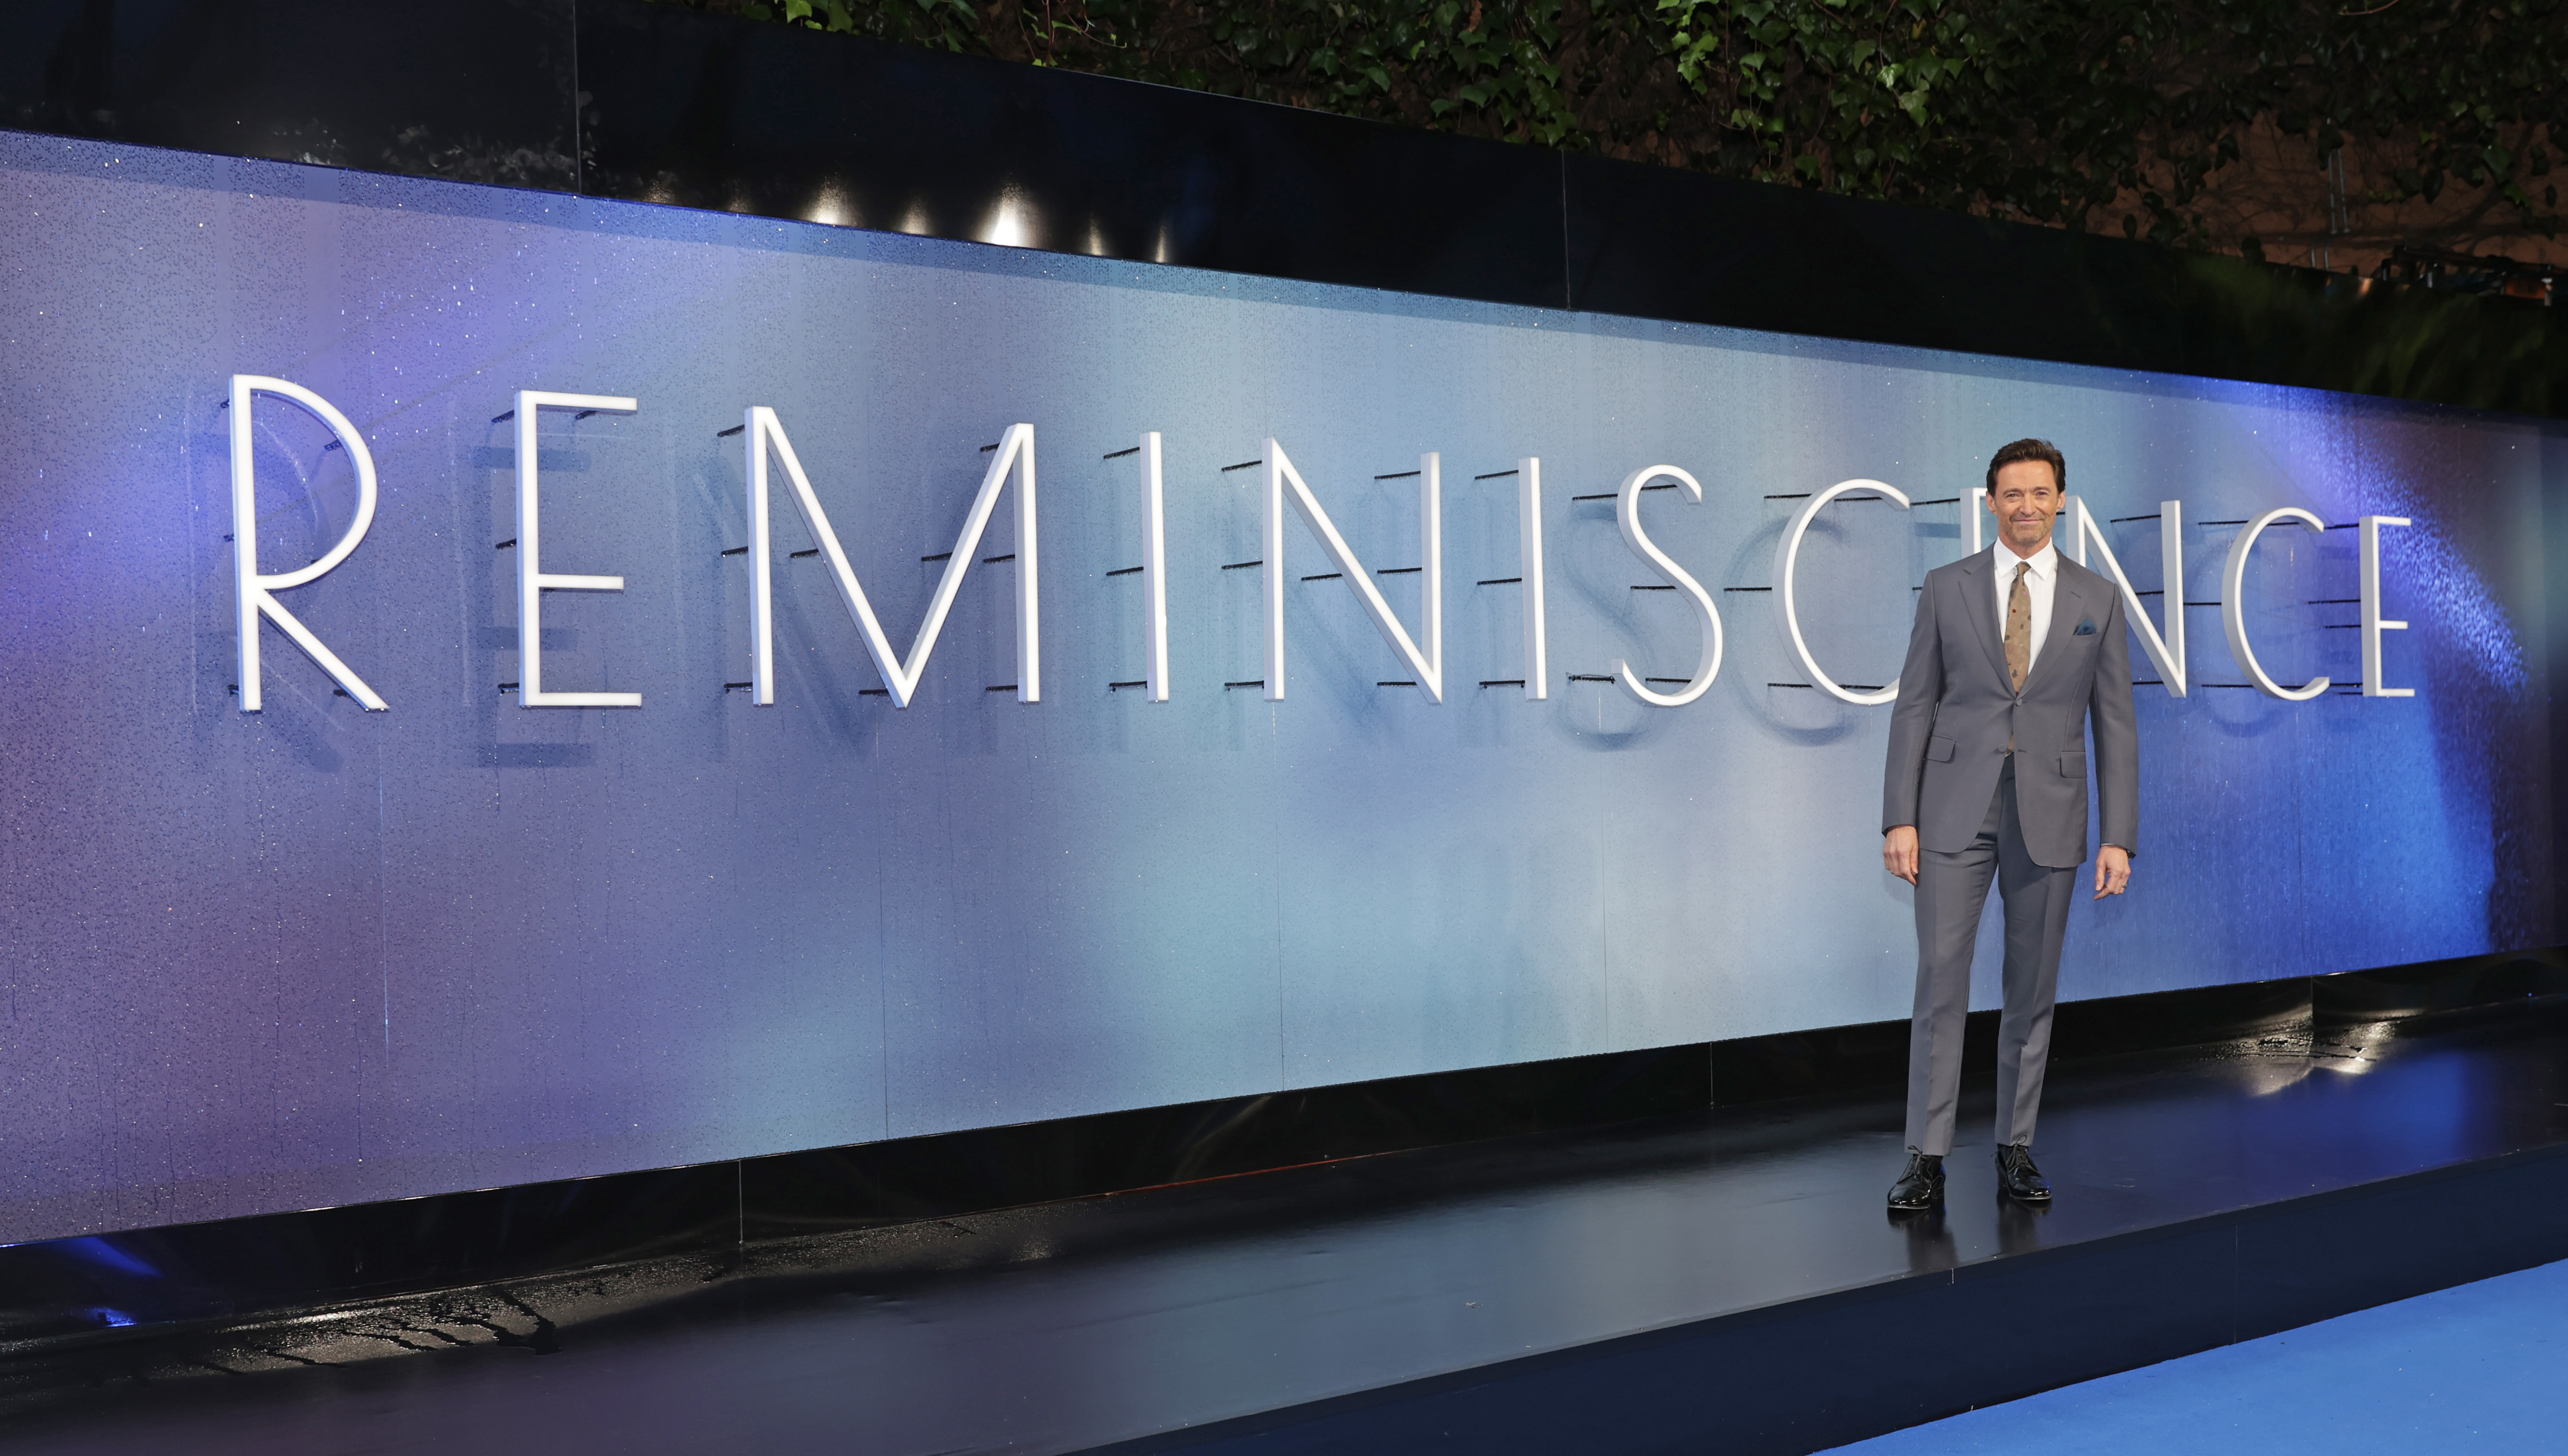 Hugh Jackman standing in front of Reminiscience sign